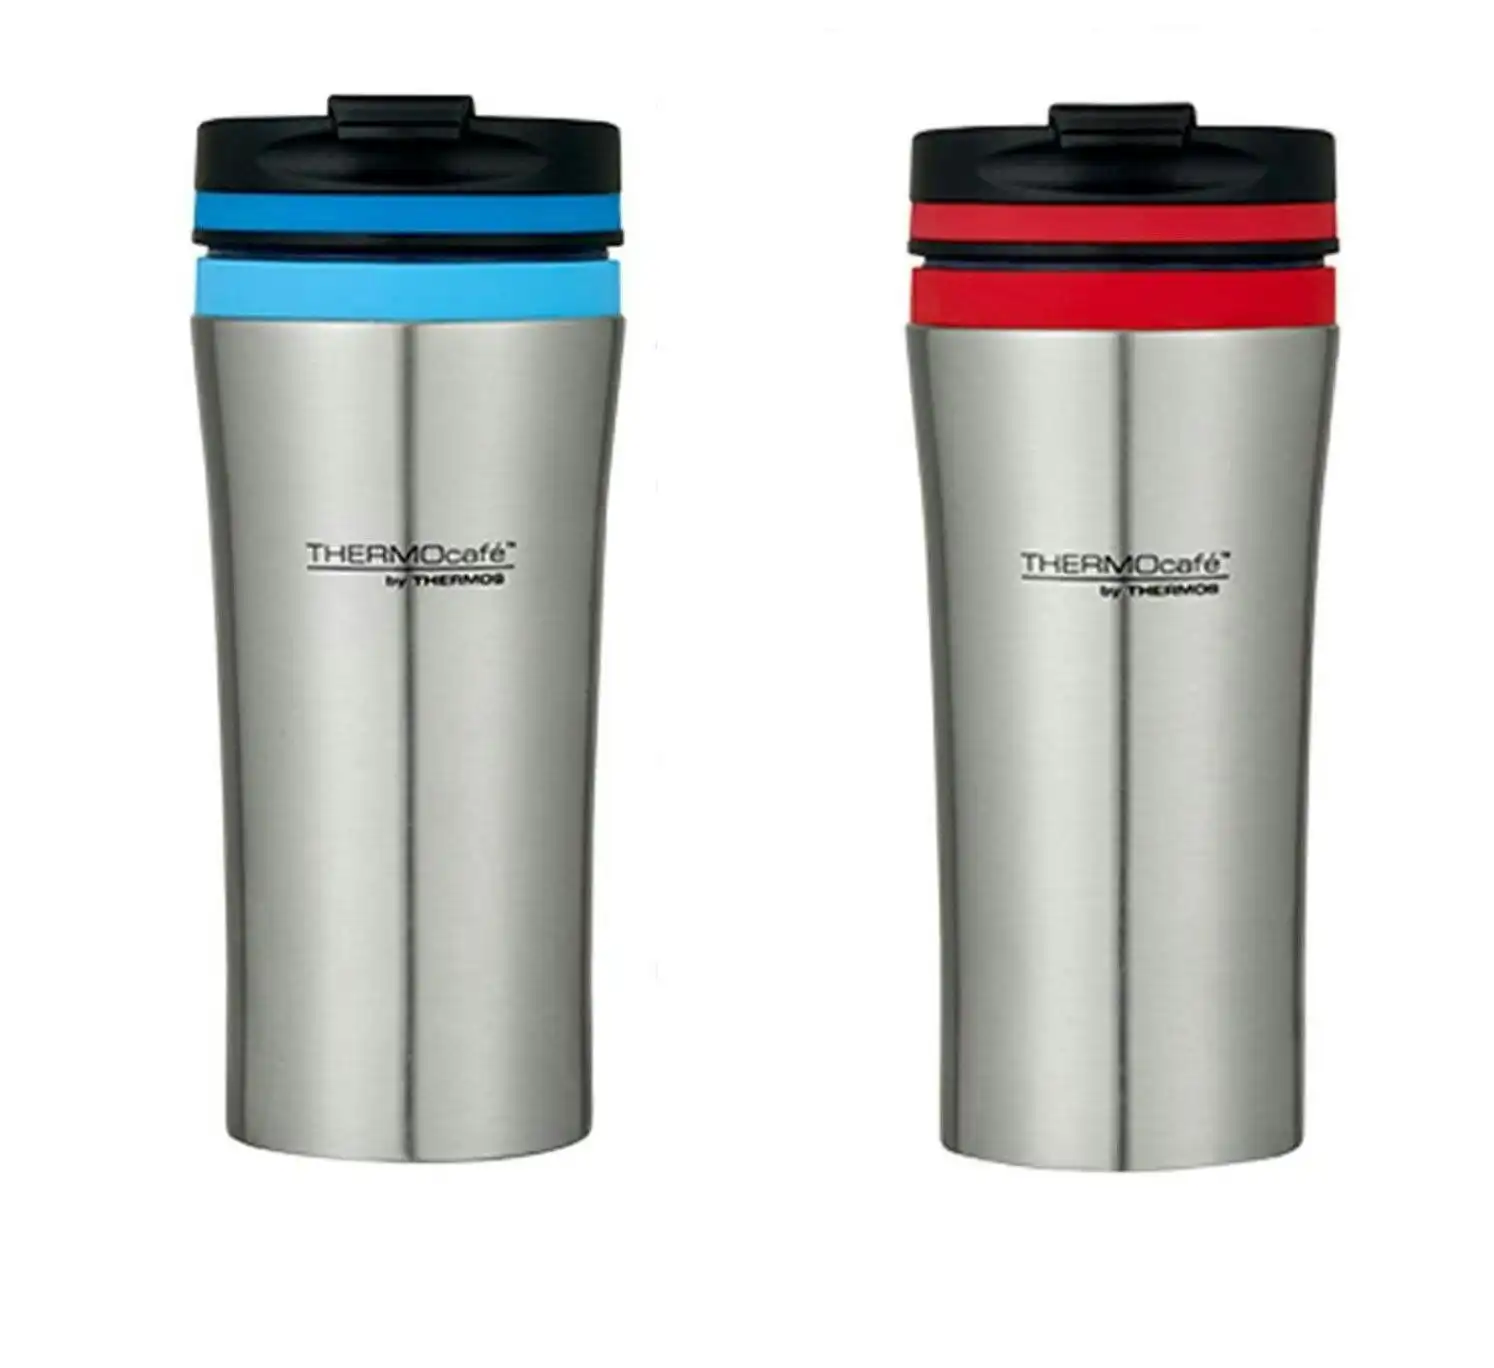 Thermos THERMOCAFE DOUBLE WALL STAINLESS STEEL TRAVEL TUMBLER 380ml - RED OR BLUE